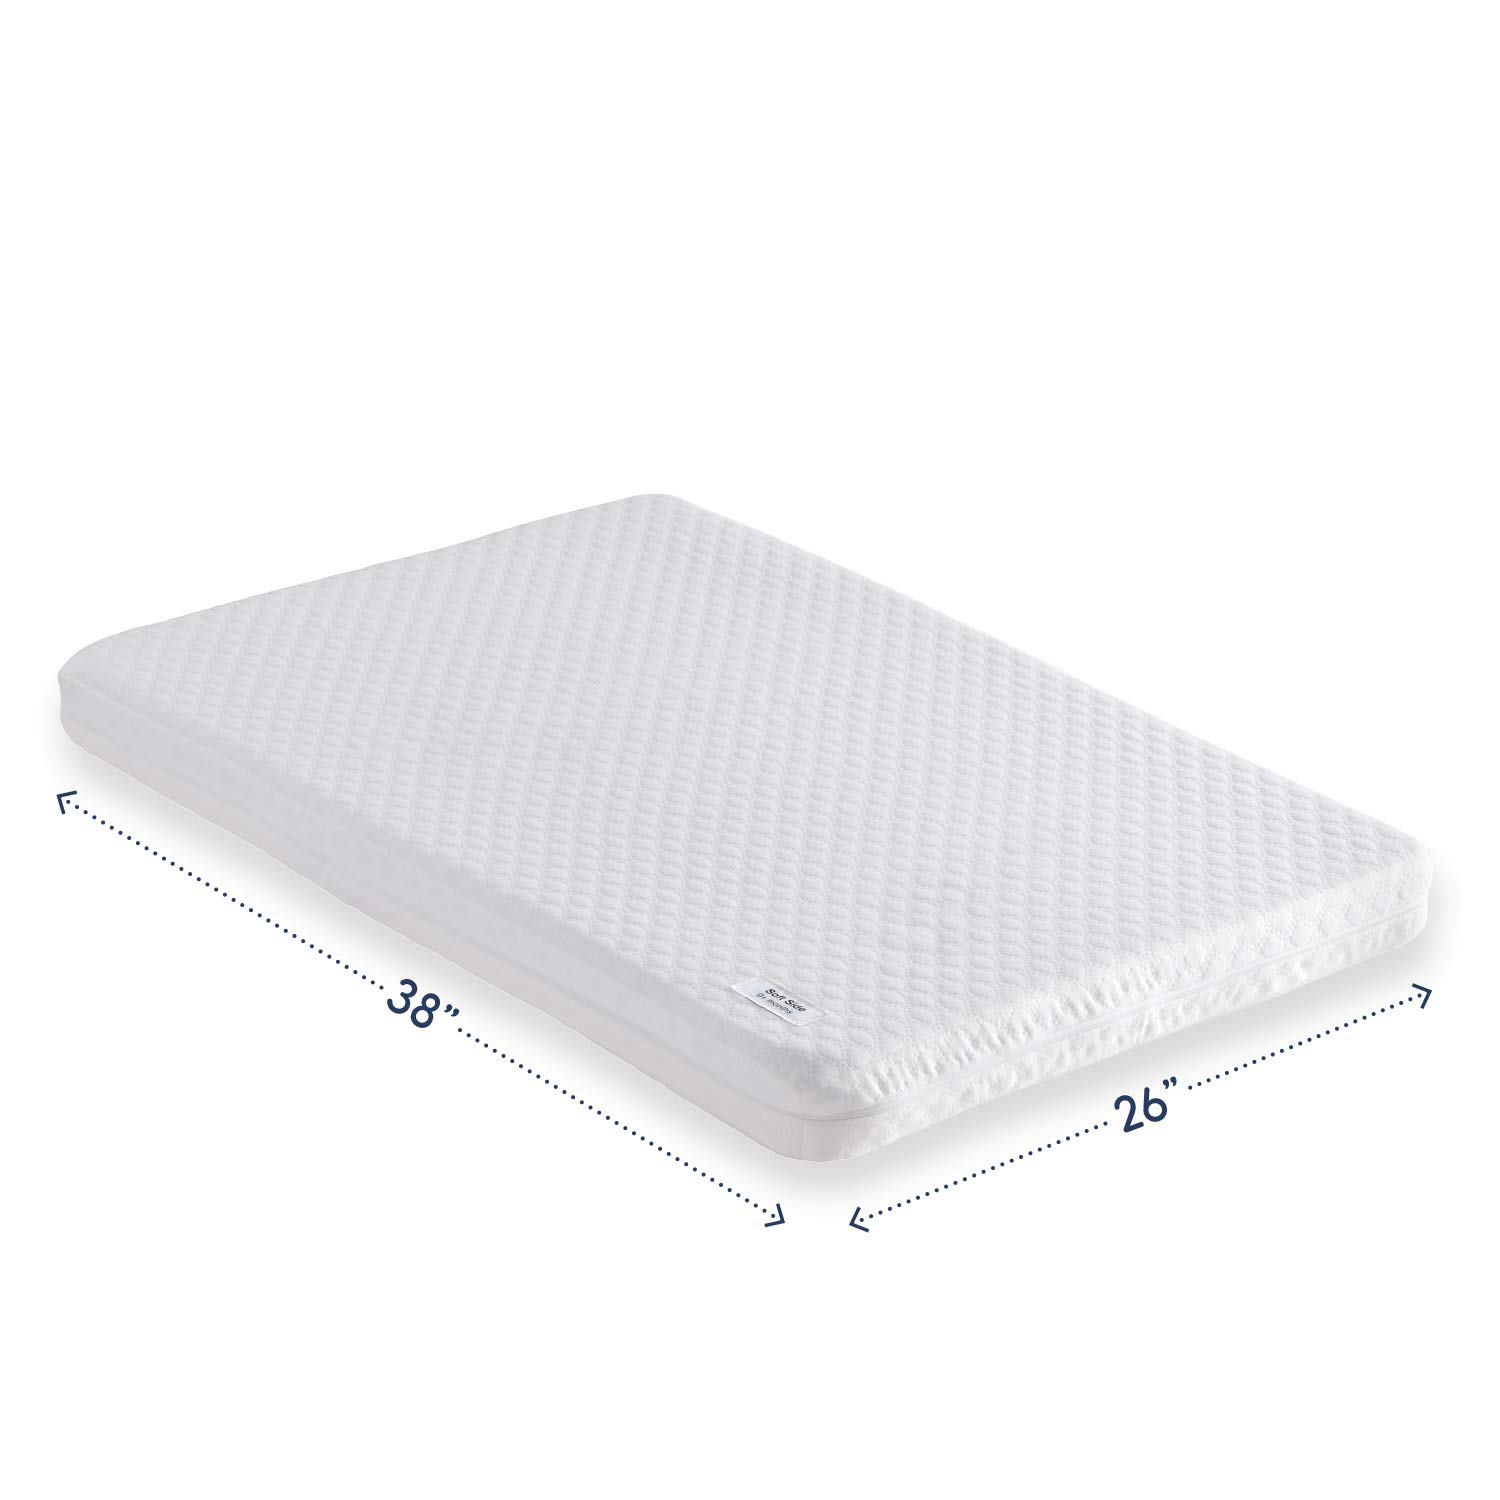 hiccapop Pack and Play Mattress Pad [Dual Sided] w/Firm Side (for Babies) & Soft Memory Foam Side (for Toddlers)